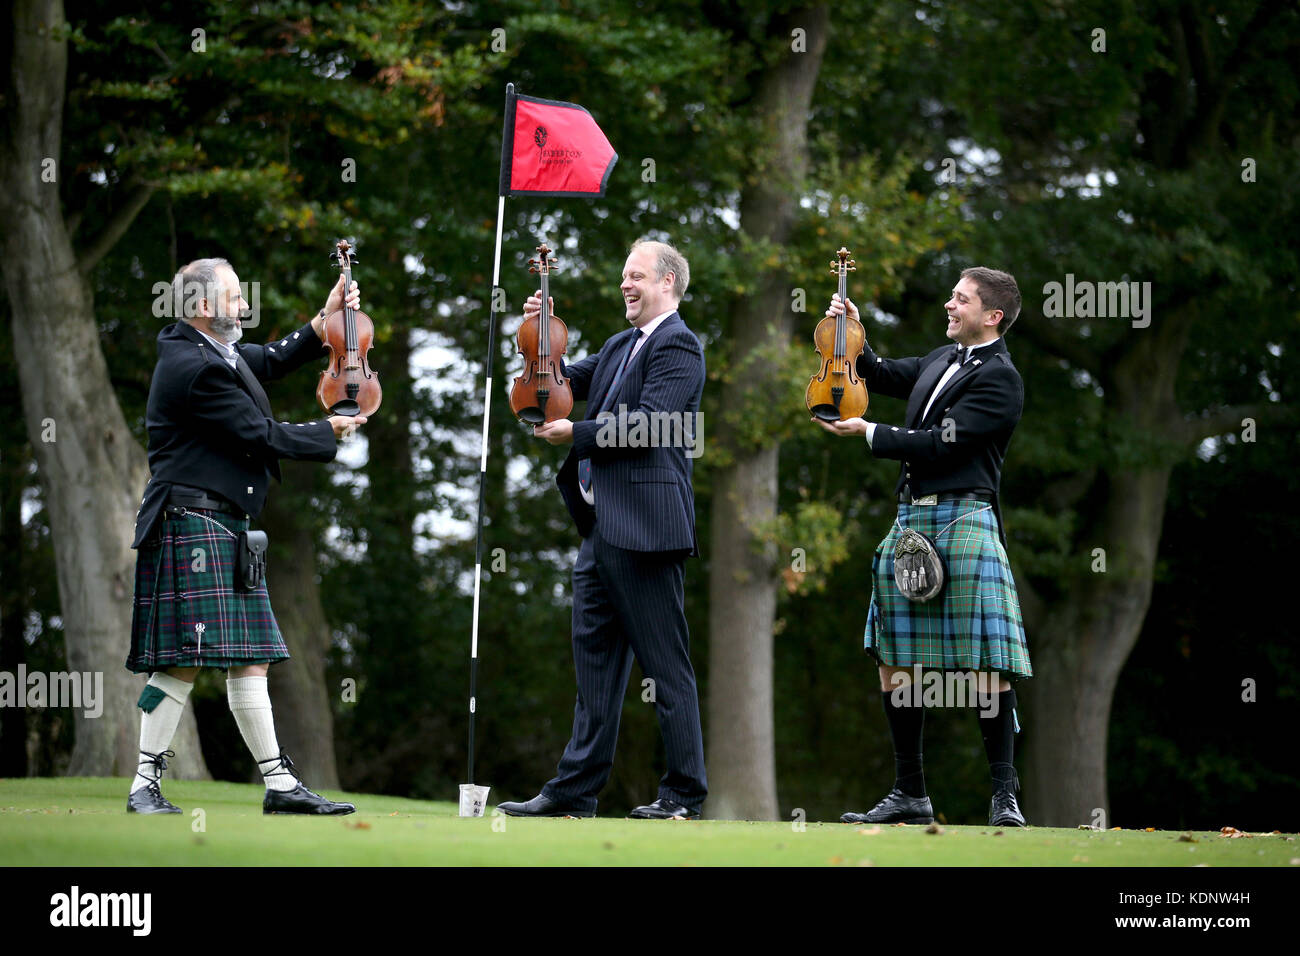 (left to right) Violin-maker Steve Burnett holding the Siegfried Sassoon violin, historian Neil McLennan, holding the Robert Graves violin and fiddle player Thoren Ferguson holding the Wilfred Owen violin, at Baberton Golf Club in Edinburgh. The three violins, made in commemoration of the war poets who met at the golf club in 1917, are to be played together for the first time. Stock Photo